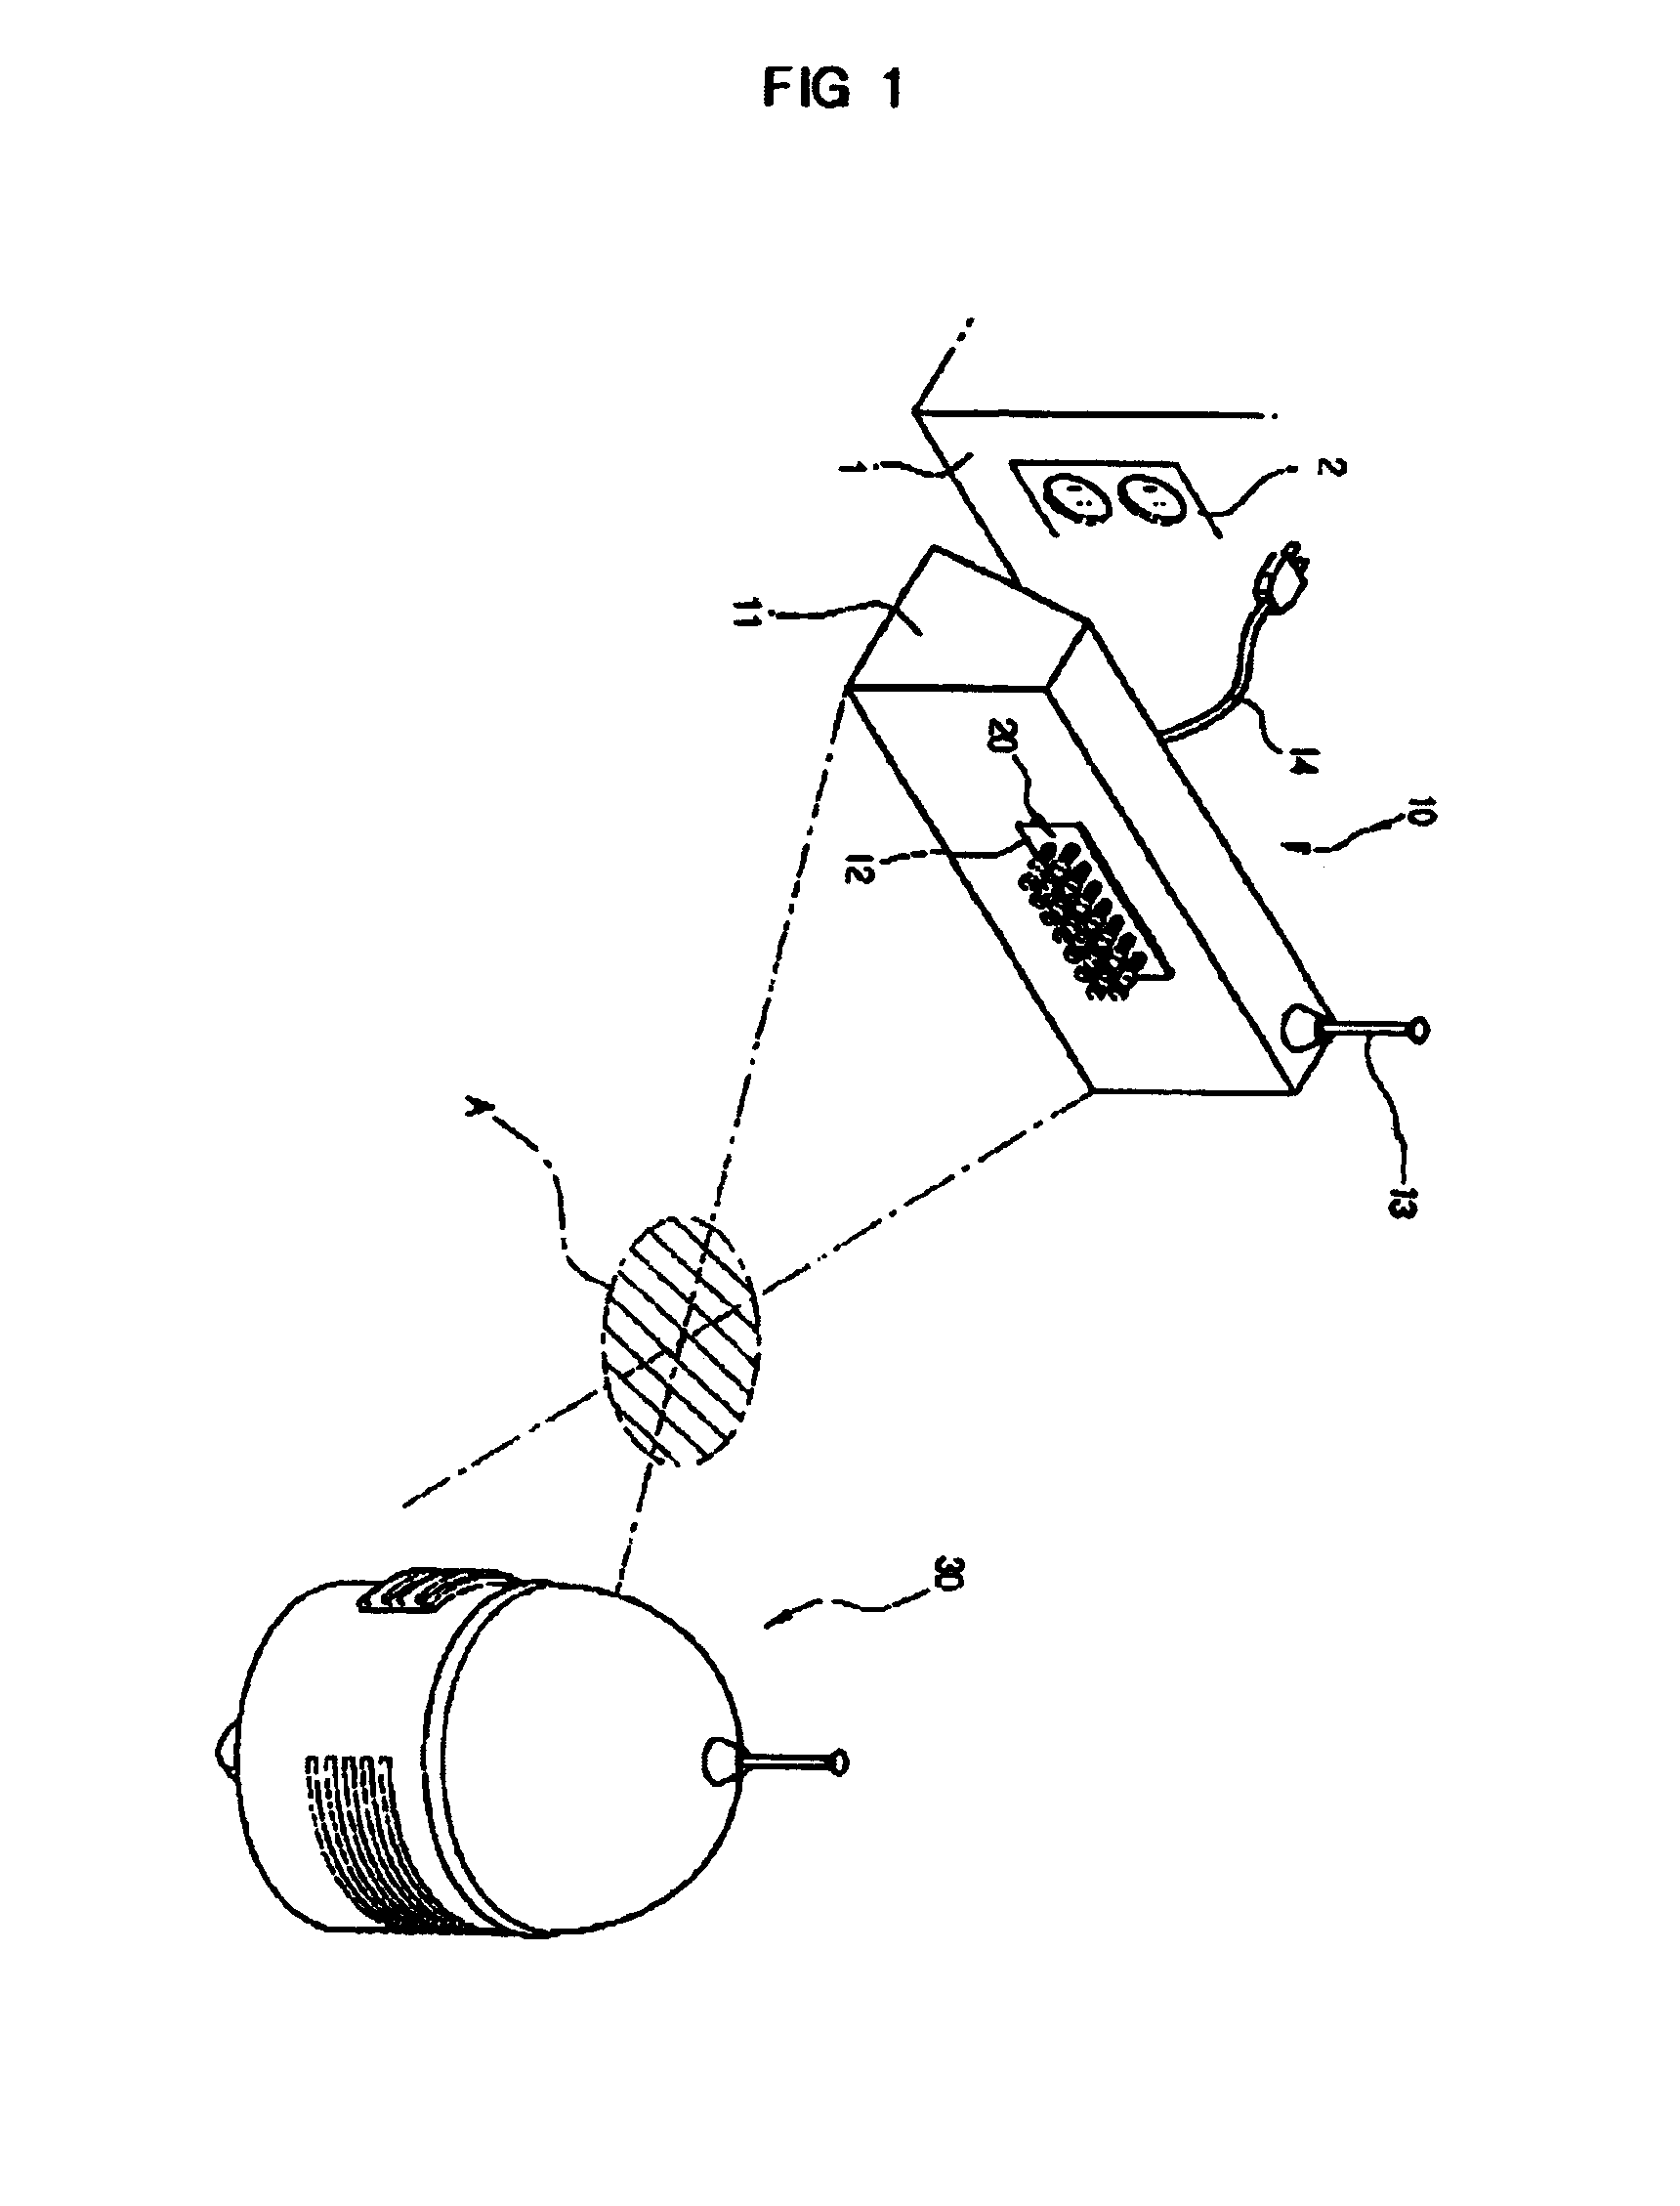 Charging apparatus used with a mobile robot